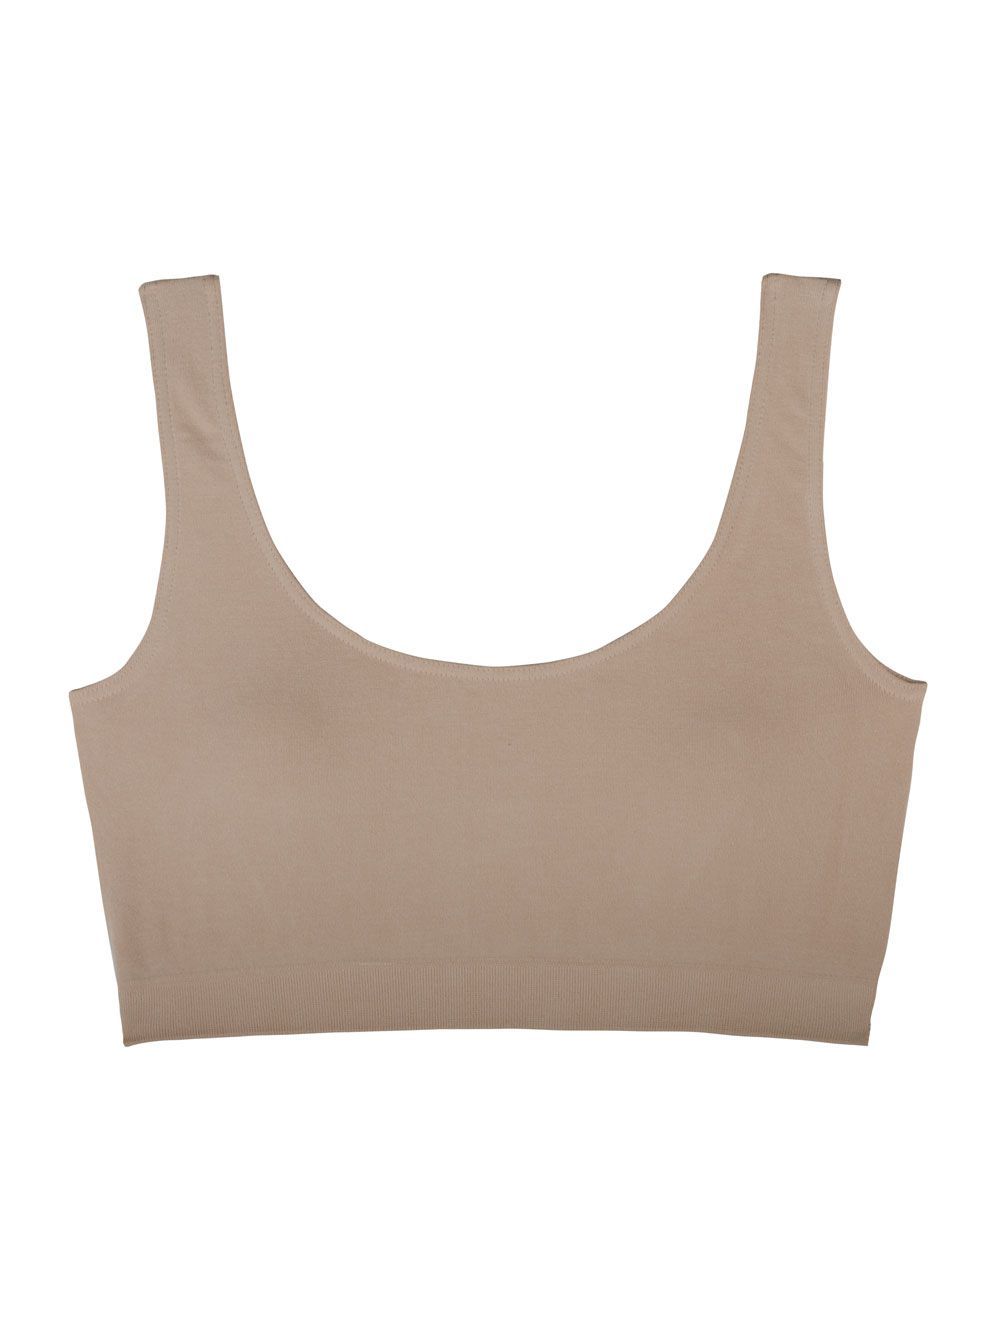 Pull on style bra with non adjustable straps Bra